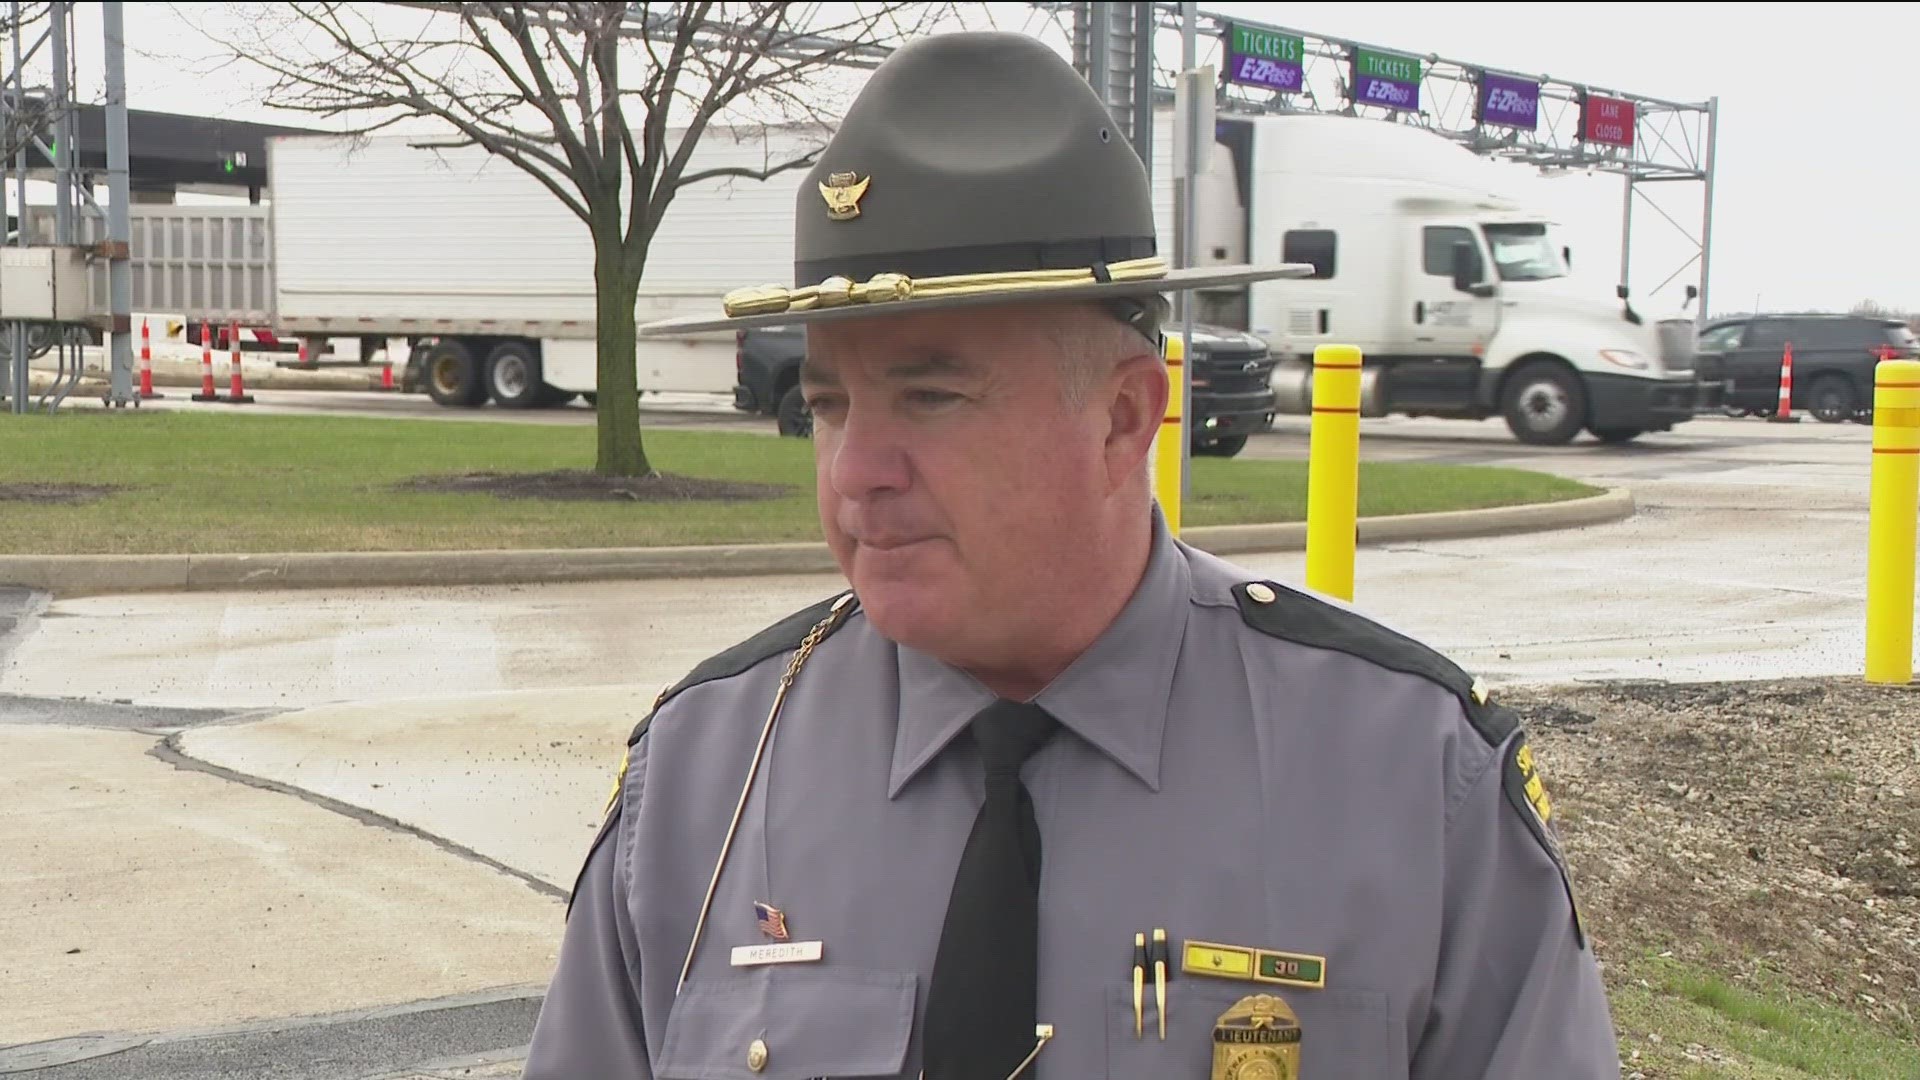 With hundreds of thousands of visitors expected in Ohio, the Ohio State Highway Patrol is ready to have more troopers on the road and turnpike to help with traffic.